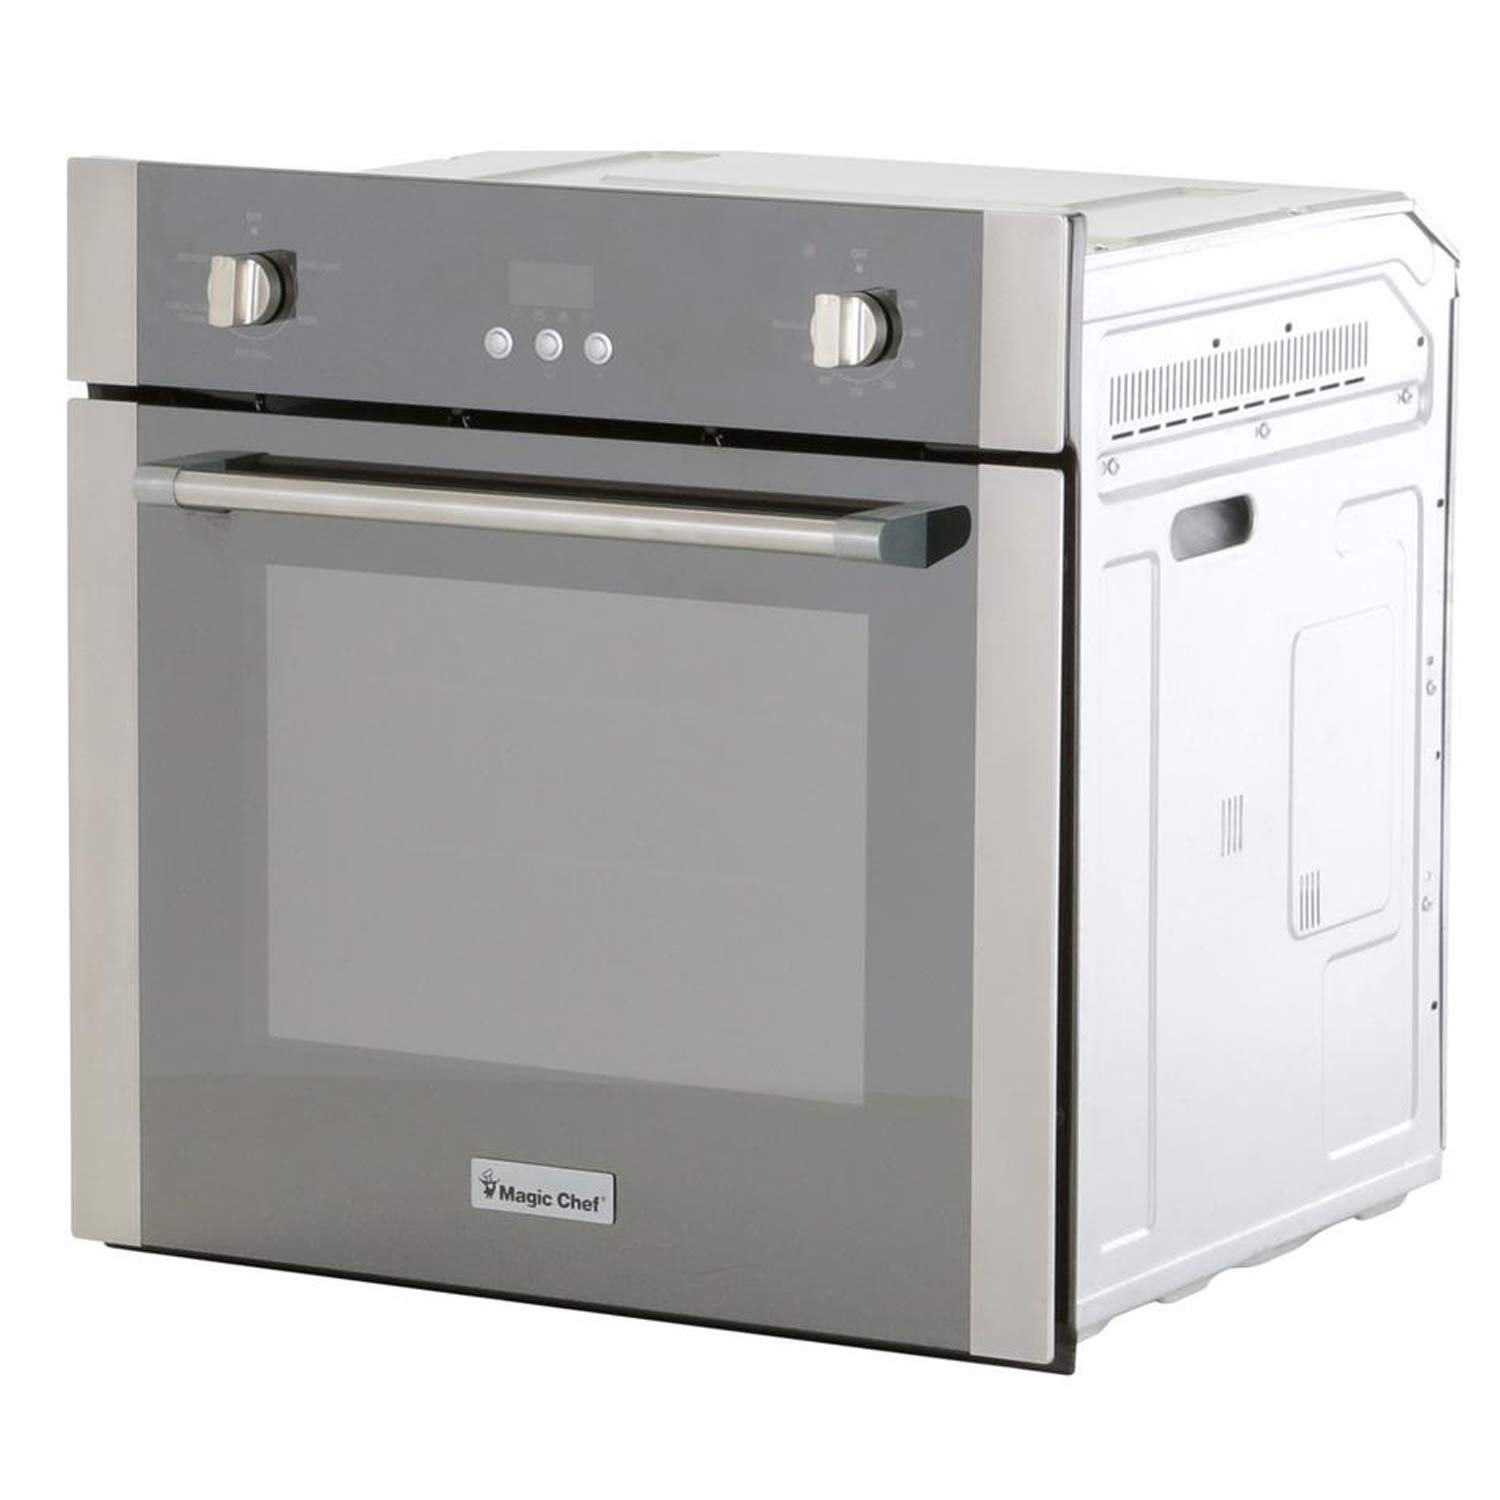 10 Best Magic Chef 24-Inch Wall Ovens for 2023